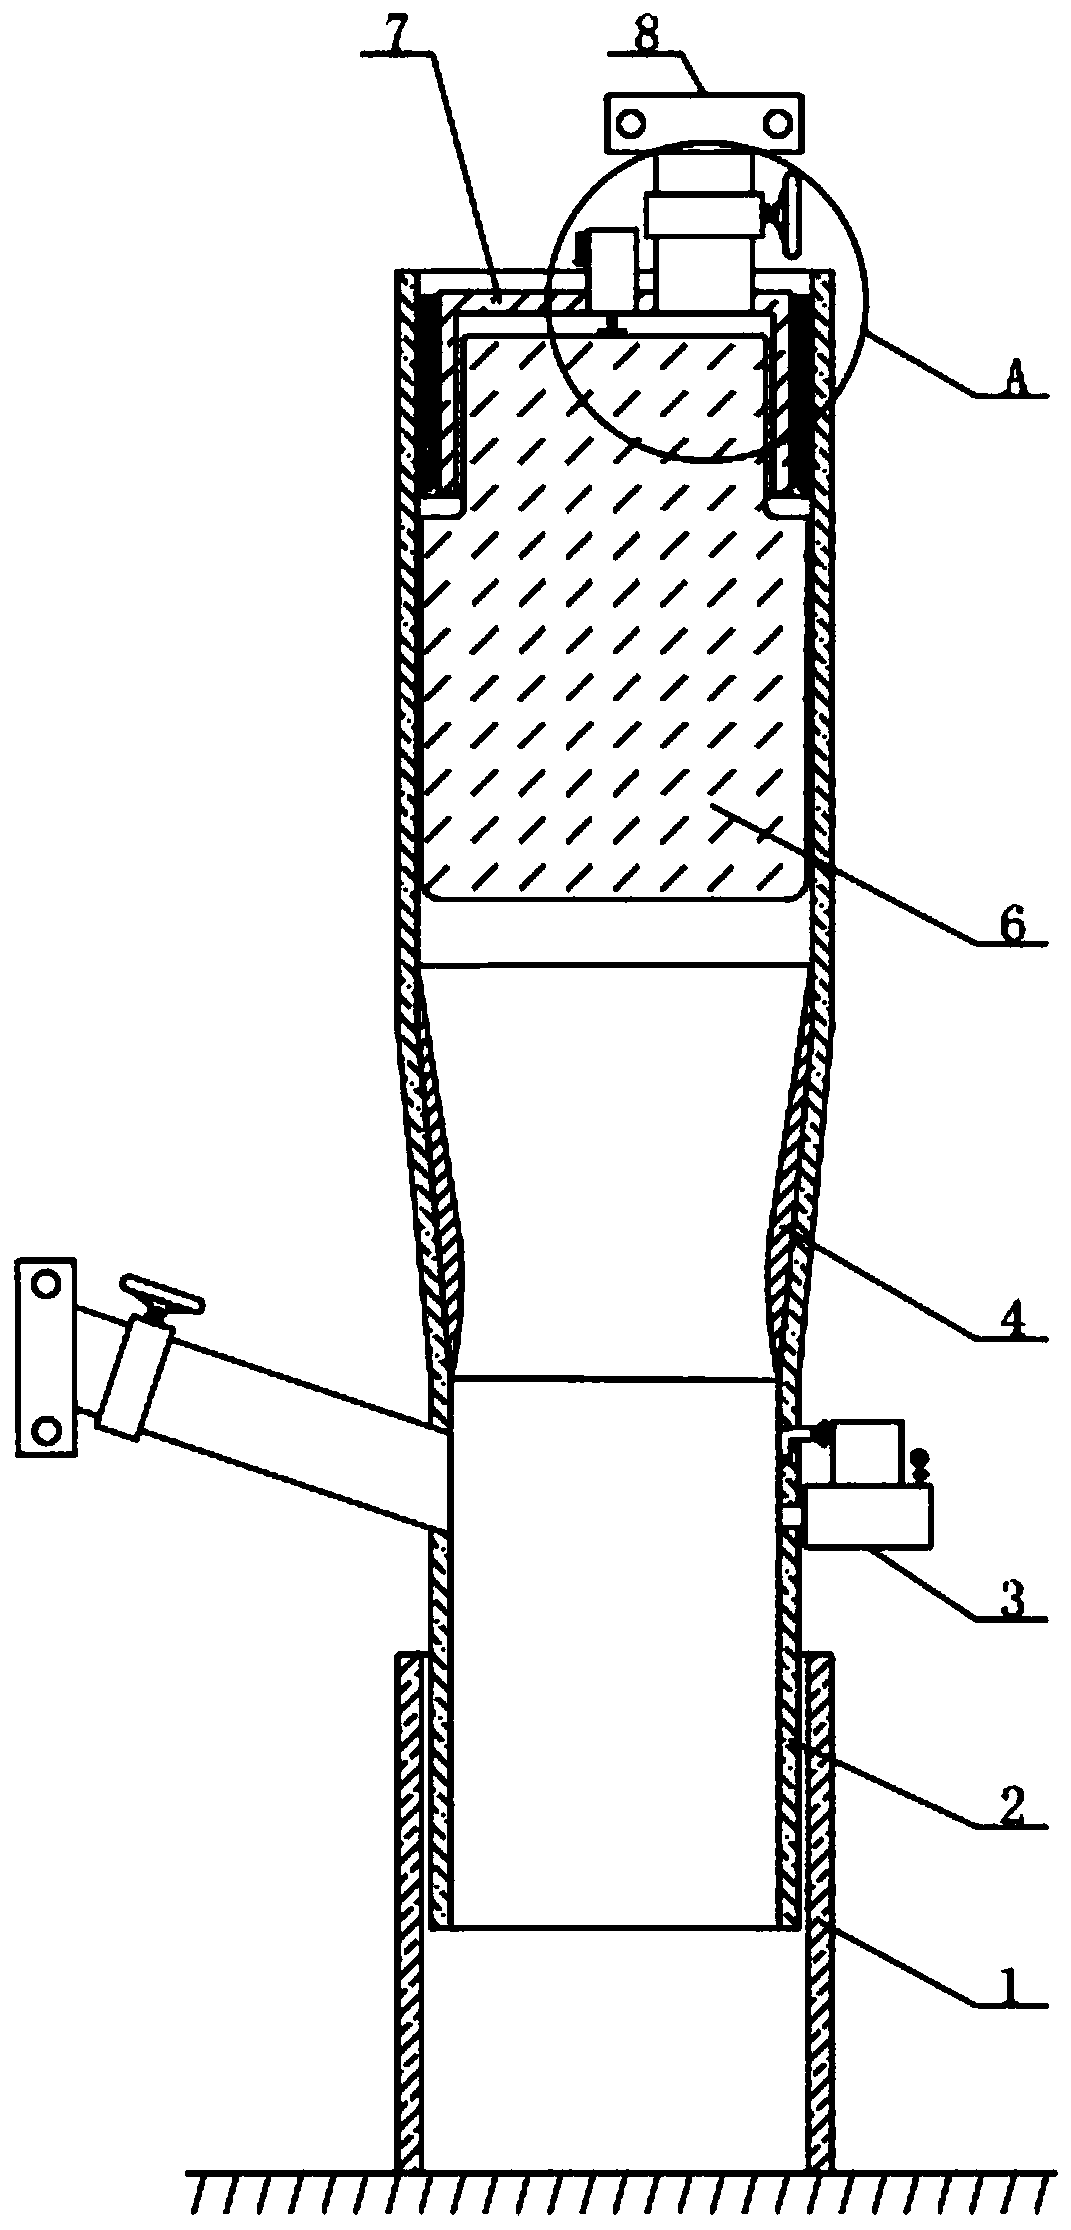 Extrusion device for drilling pressurized water slurry replacement and construction process